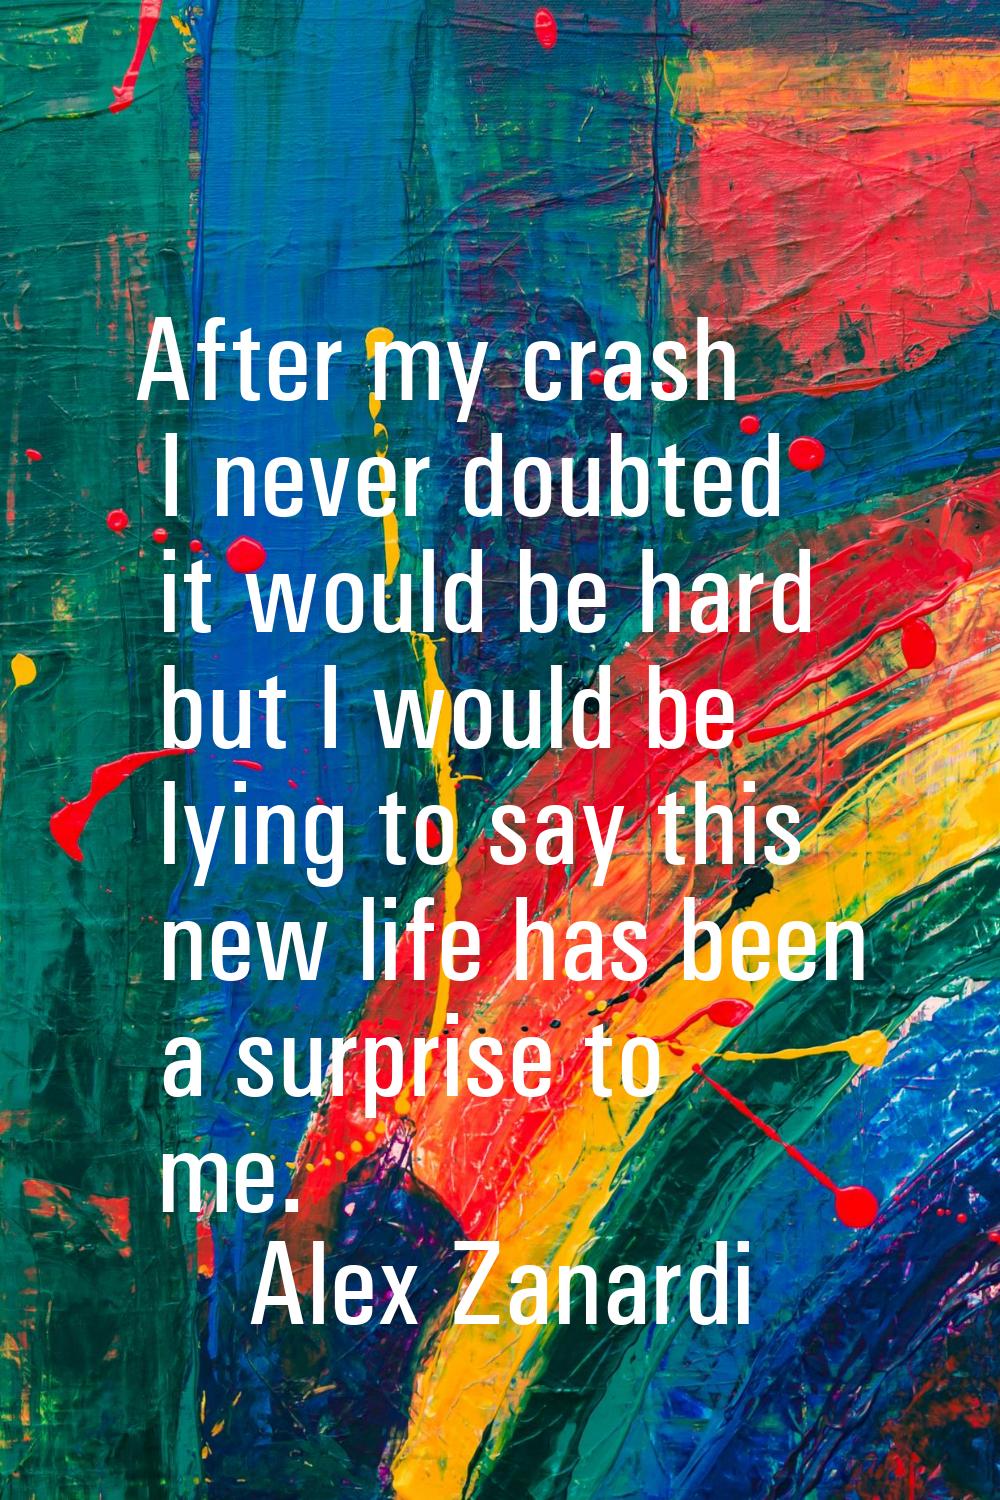 After my crash I never doubted it would be hard but I would be lying to say this new life has been 